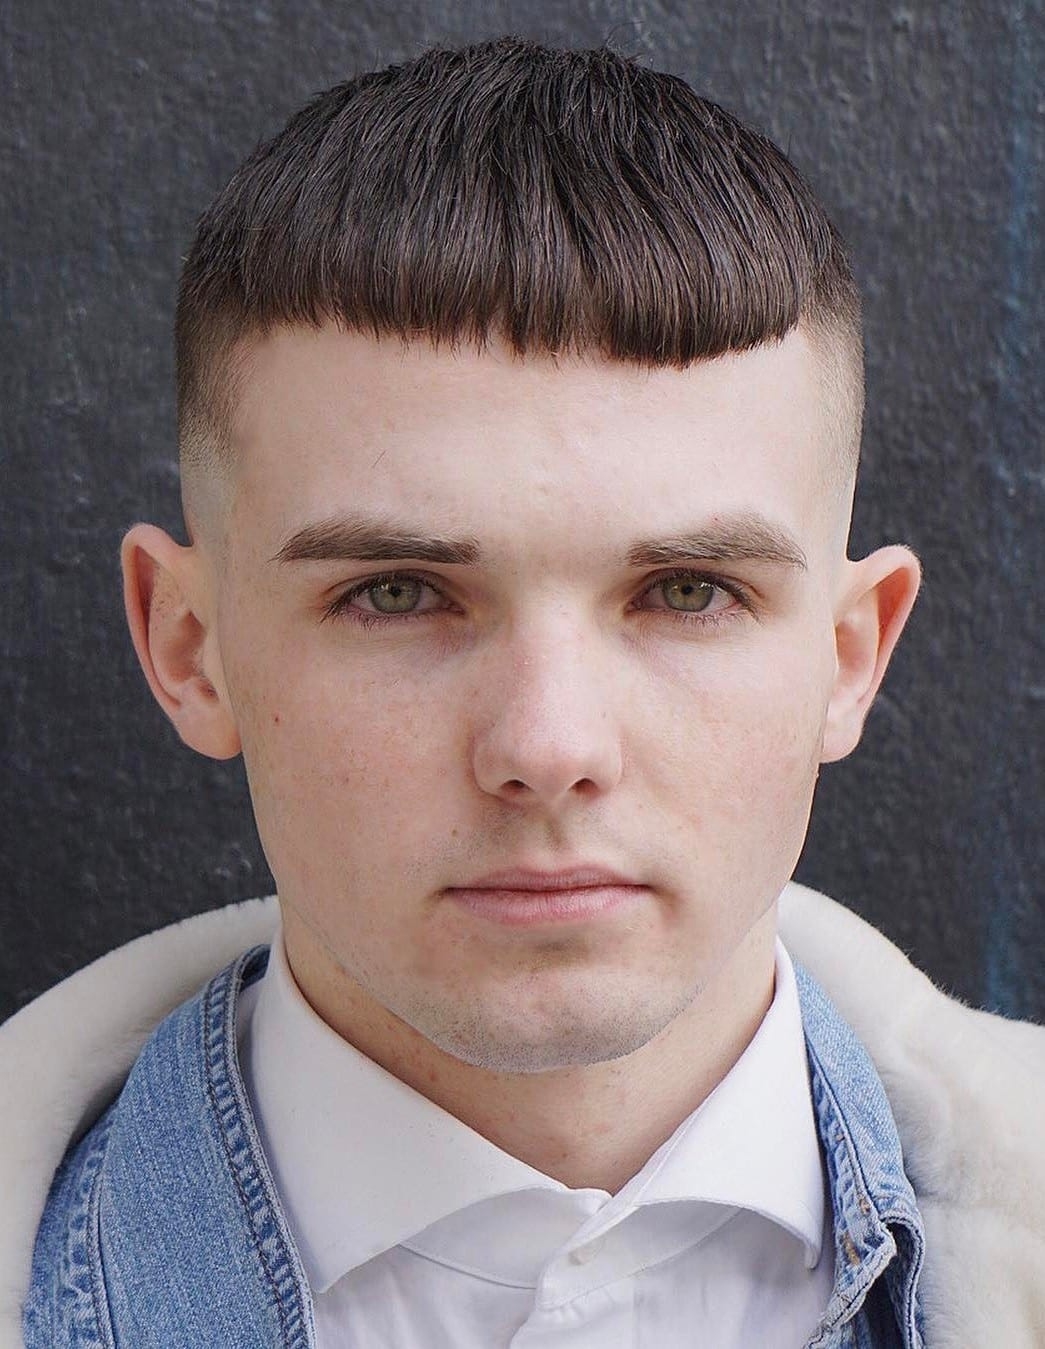 20 Selected Hairstyles For Men With Big Foreheads intended for Hairstyle For Big Head